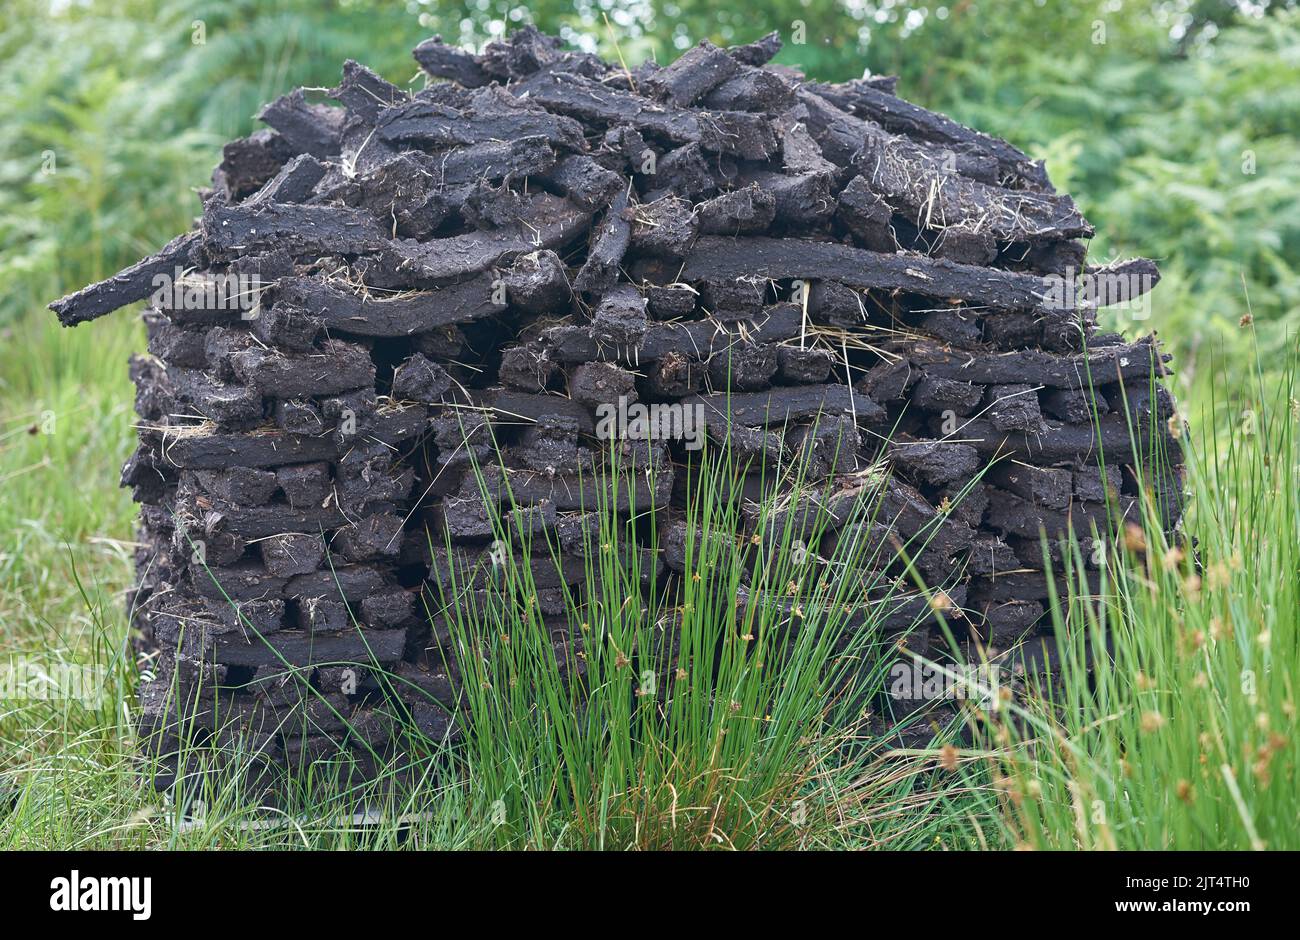 Stacks of turf fossil fuel drying in an Irish bog. Stock Photo